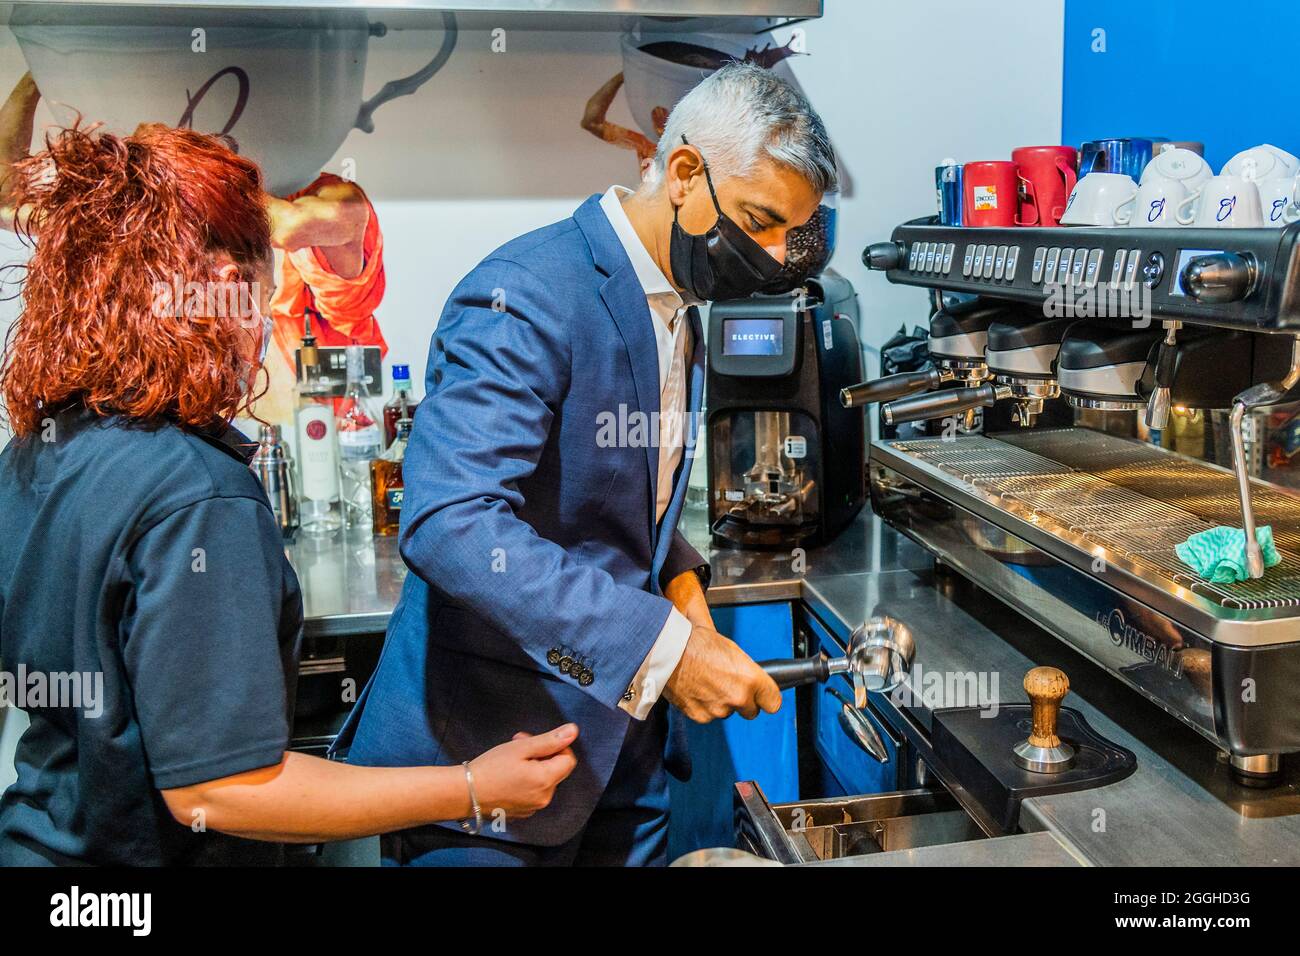 London, UK. 1 Sep 2021. Having a go at making a coffee - Mayor of London Sadiq Khan visits food and drinks market Mercato Metropolitano (MM) at their site in Elephant and Castle to speak about his skills offer to Londoners and his plan for skills academies. This offers unemployed and low-paid Londoners the chance to retrain for free to secure qualifications and jobs in a range of industries including hospitality, digital, health and the green economy. The Mayor meets students who have recently completed courses in the hospitality and digital sectors includes two learners who have benefitted fr Stock Photo